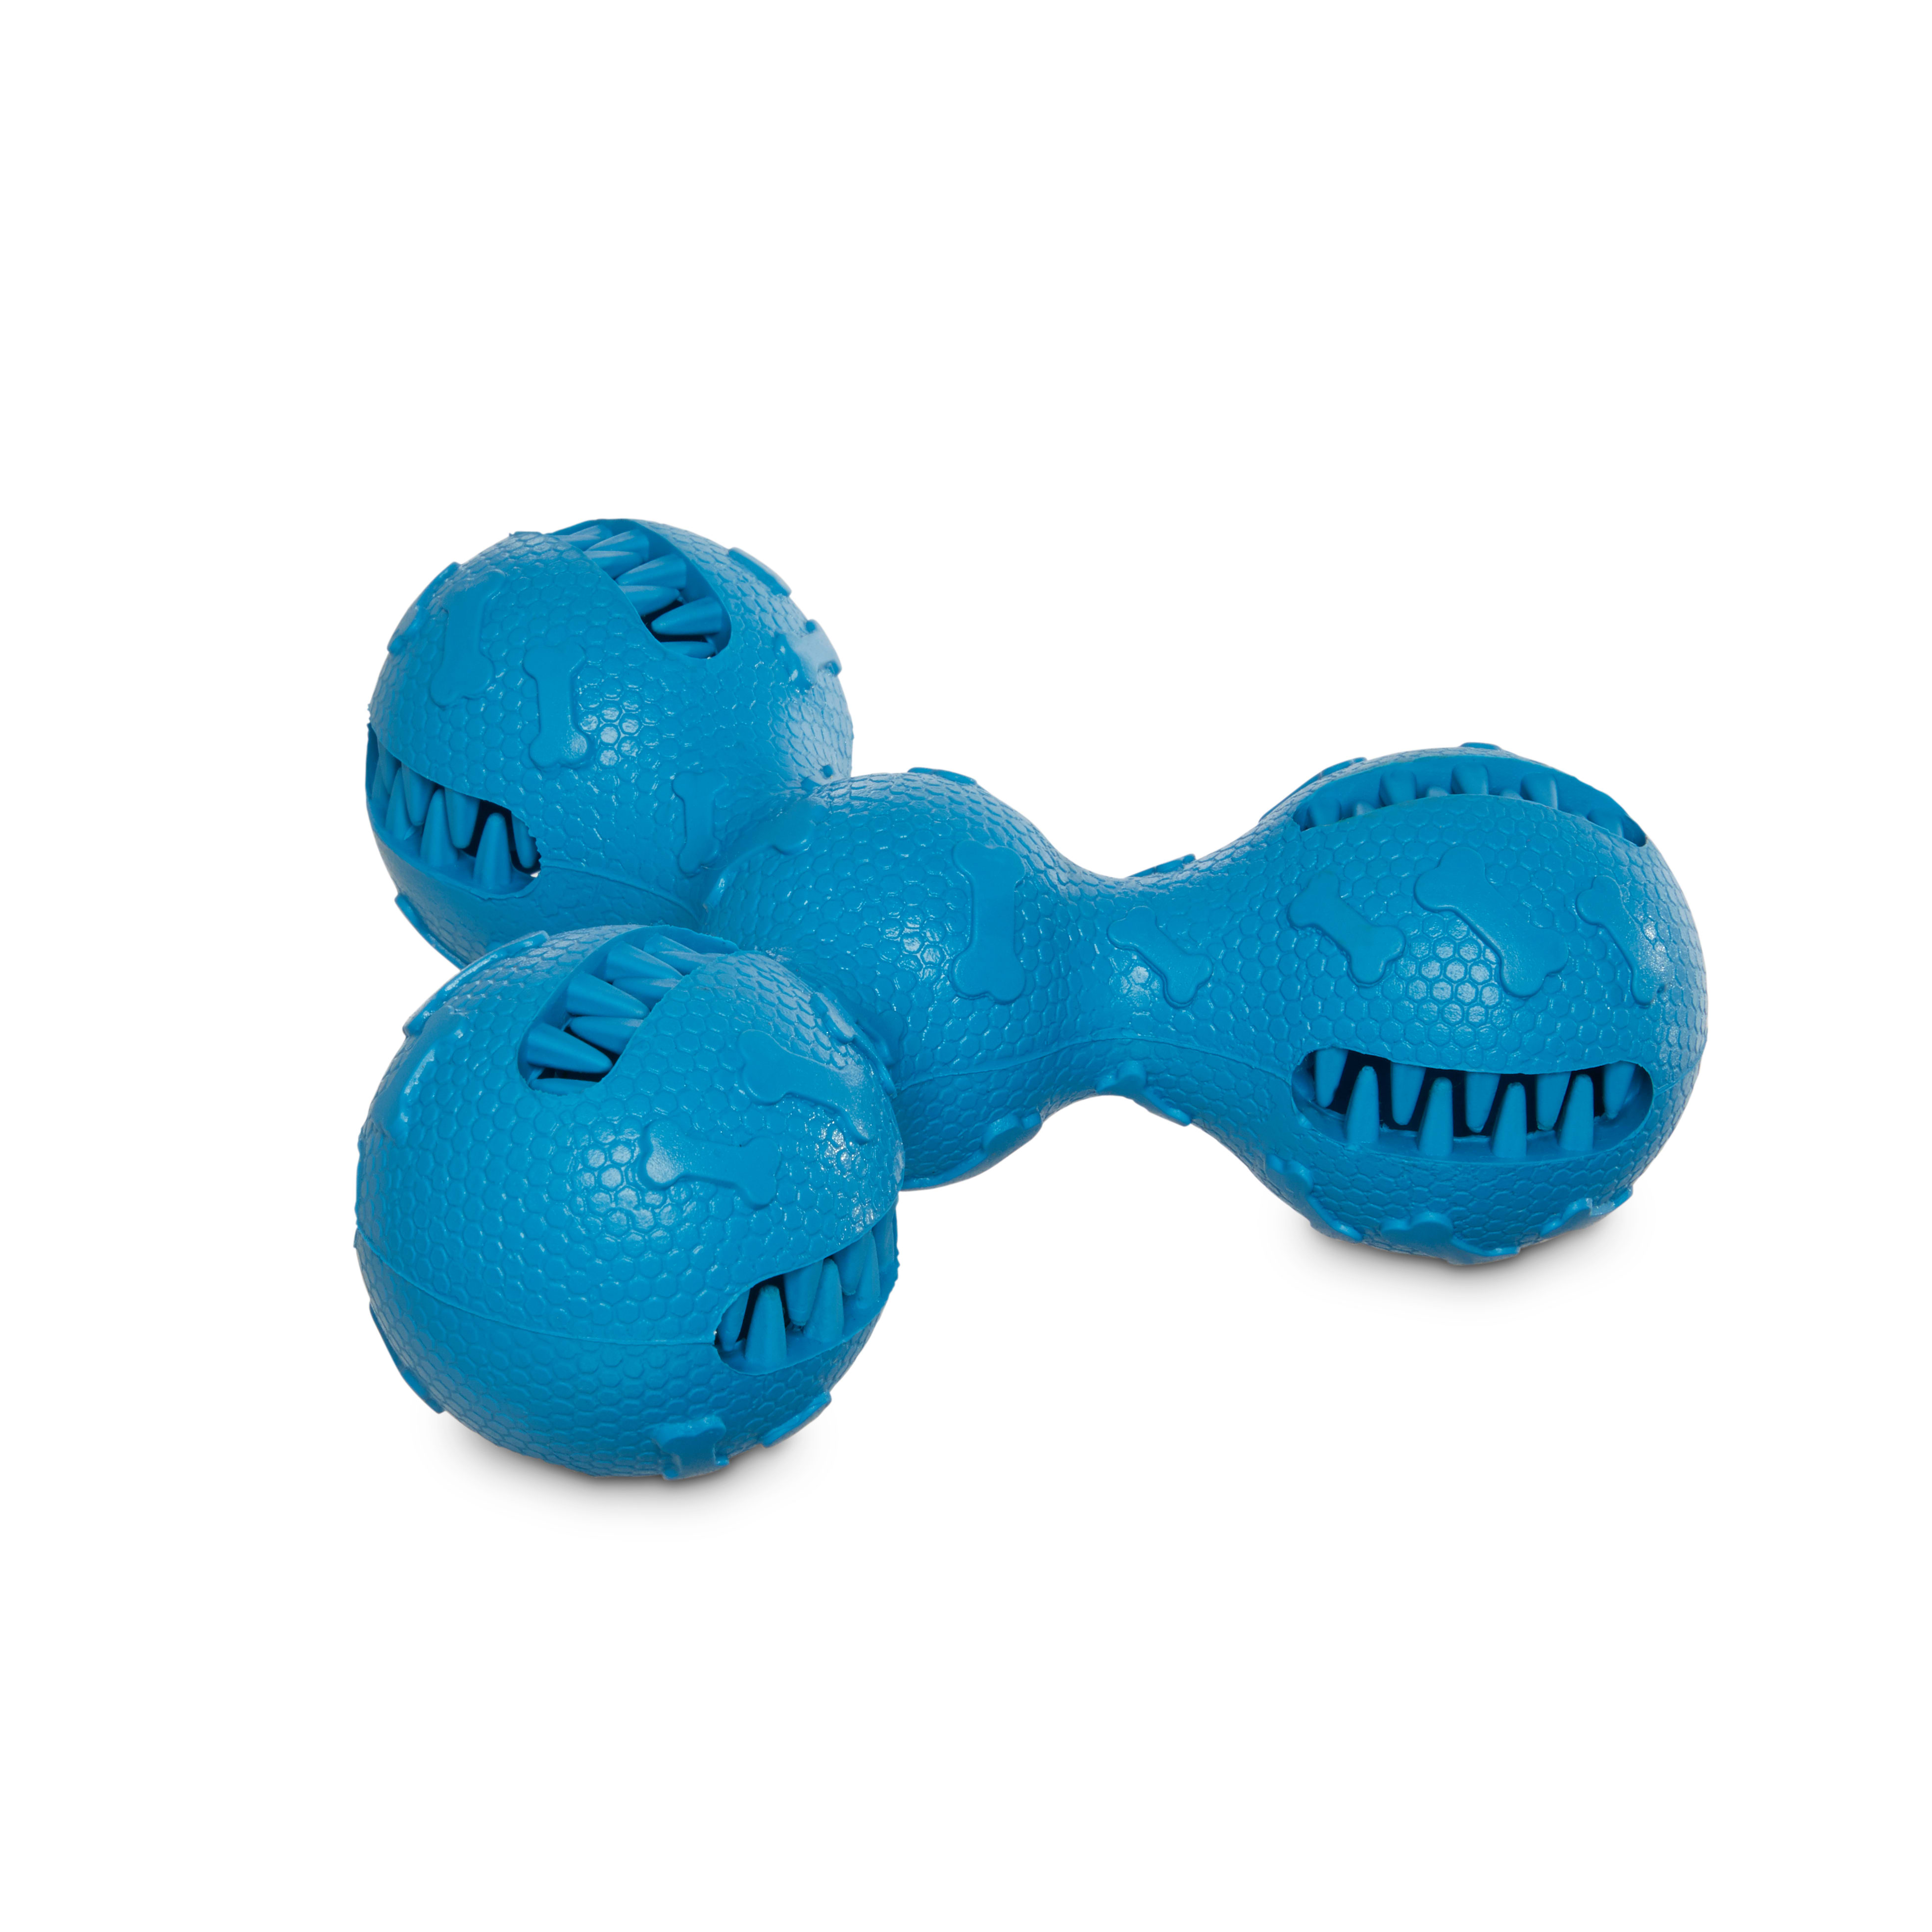 Treat Dispensing Dog Toy – Perfect Paw Store